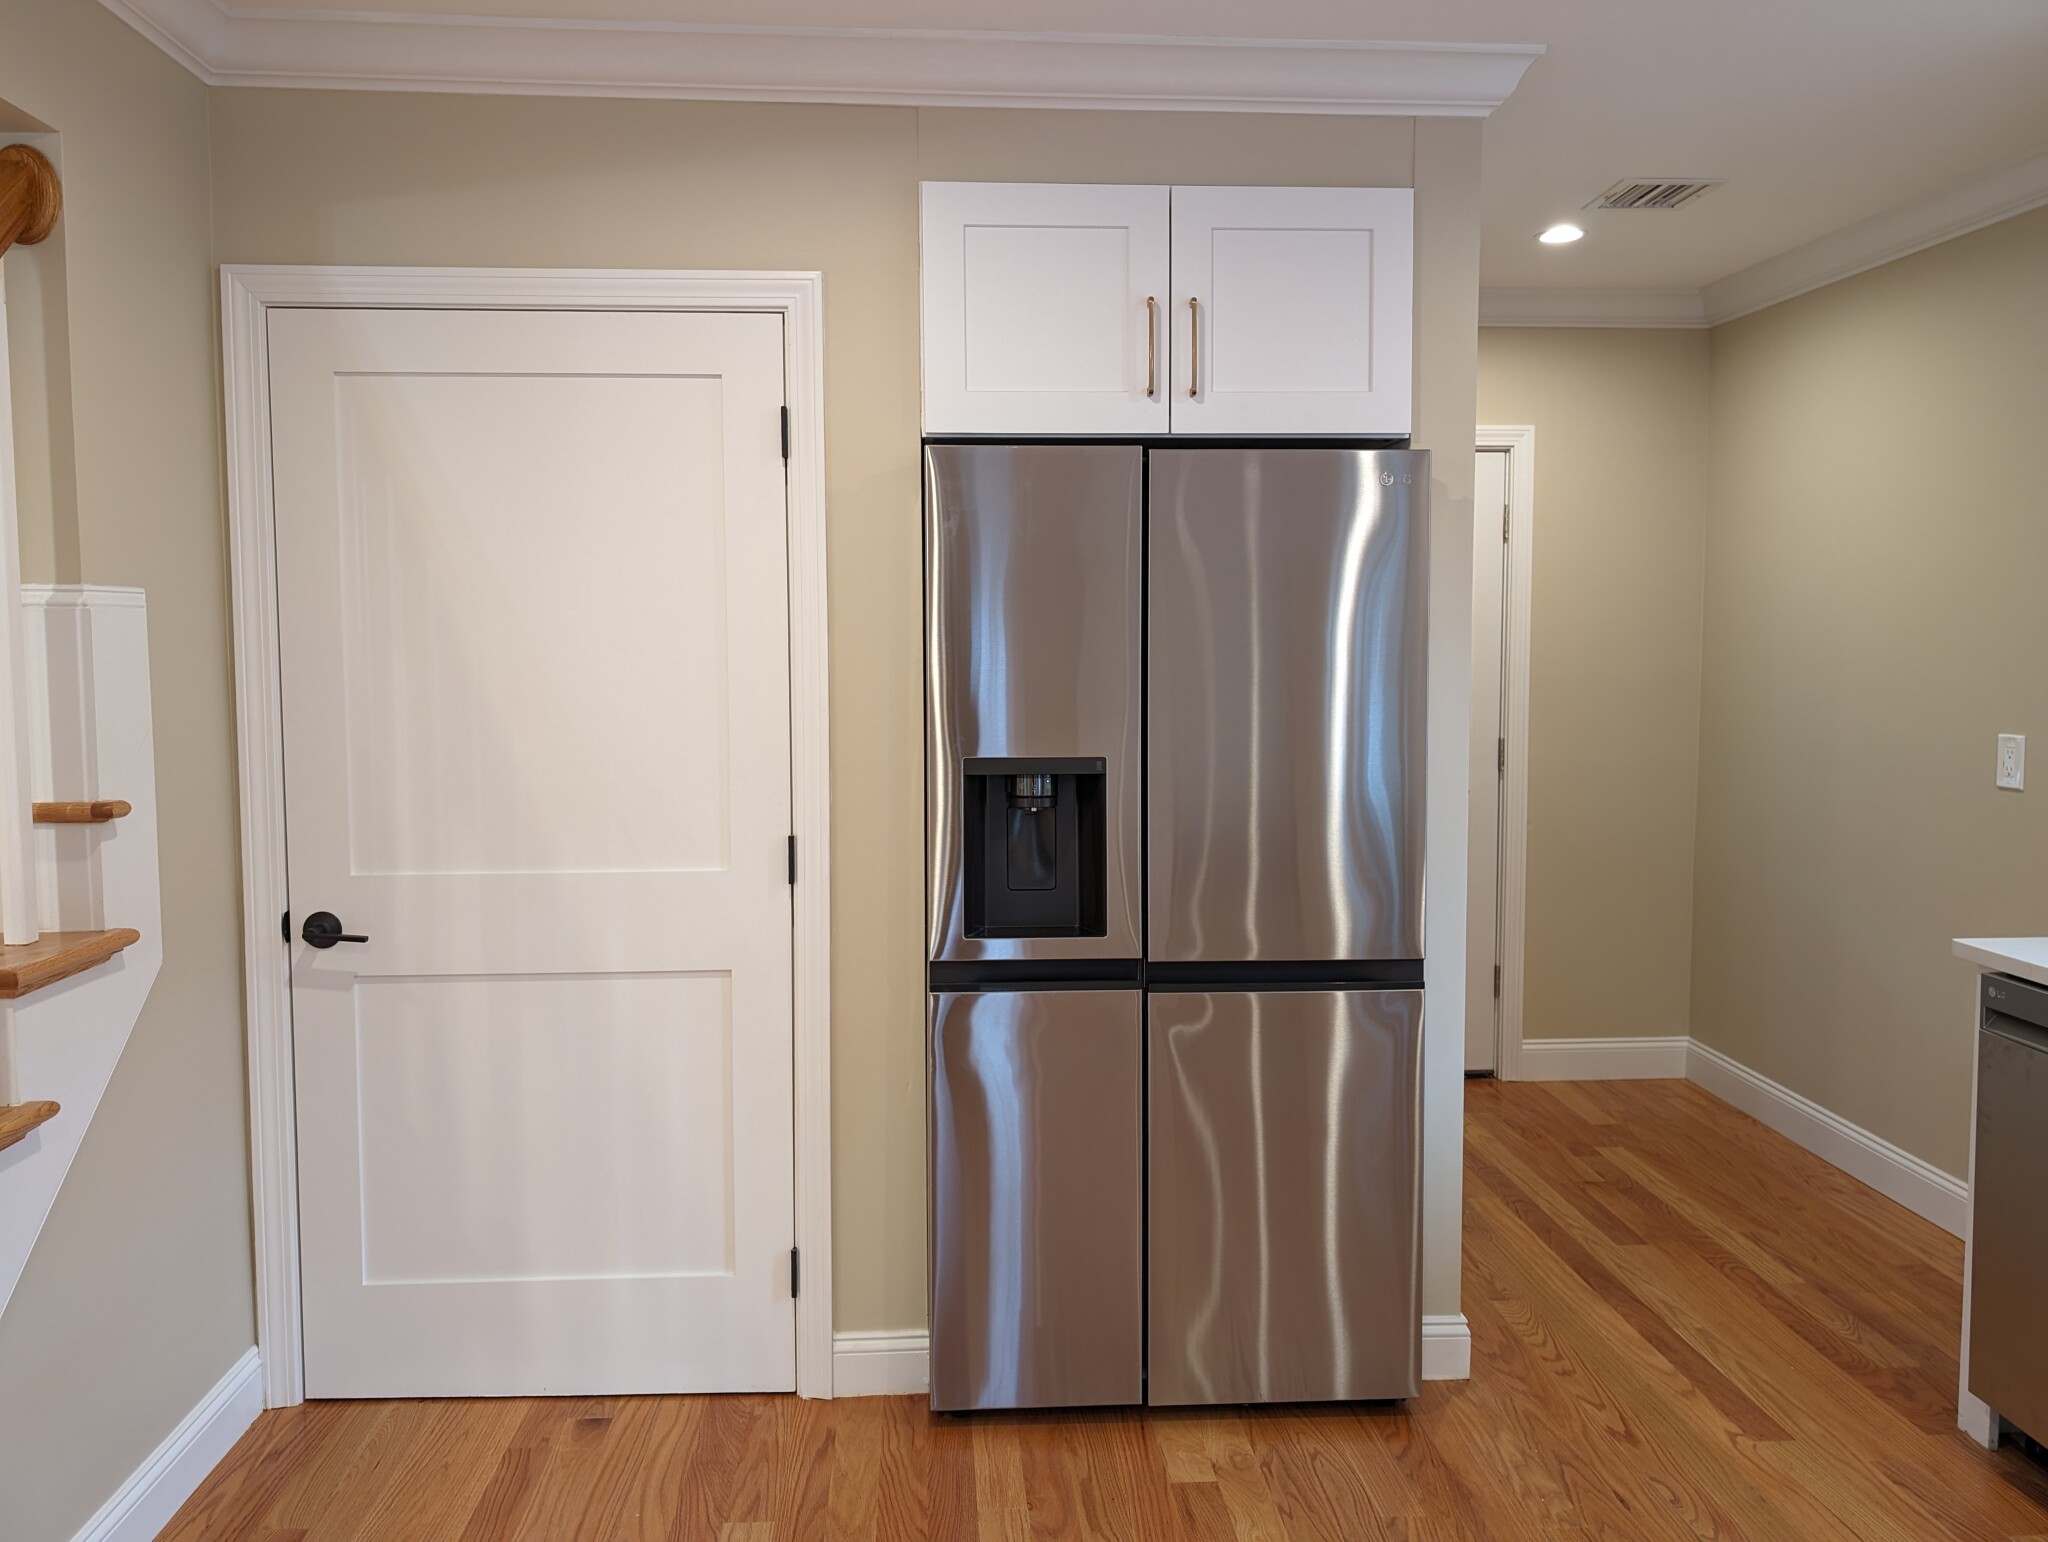 Photos of apartment on Warwick Rd.,Belmont MA 02478